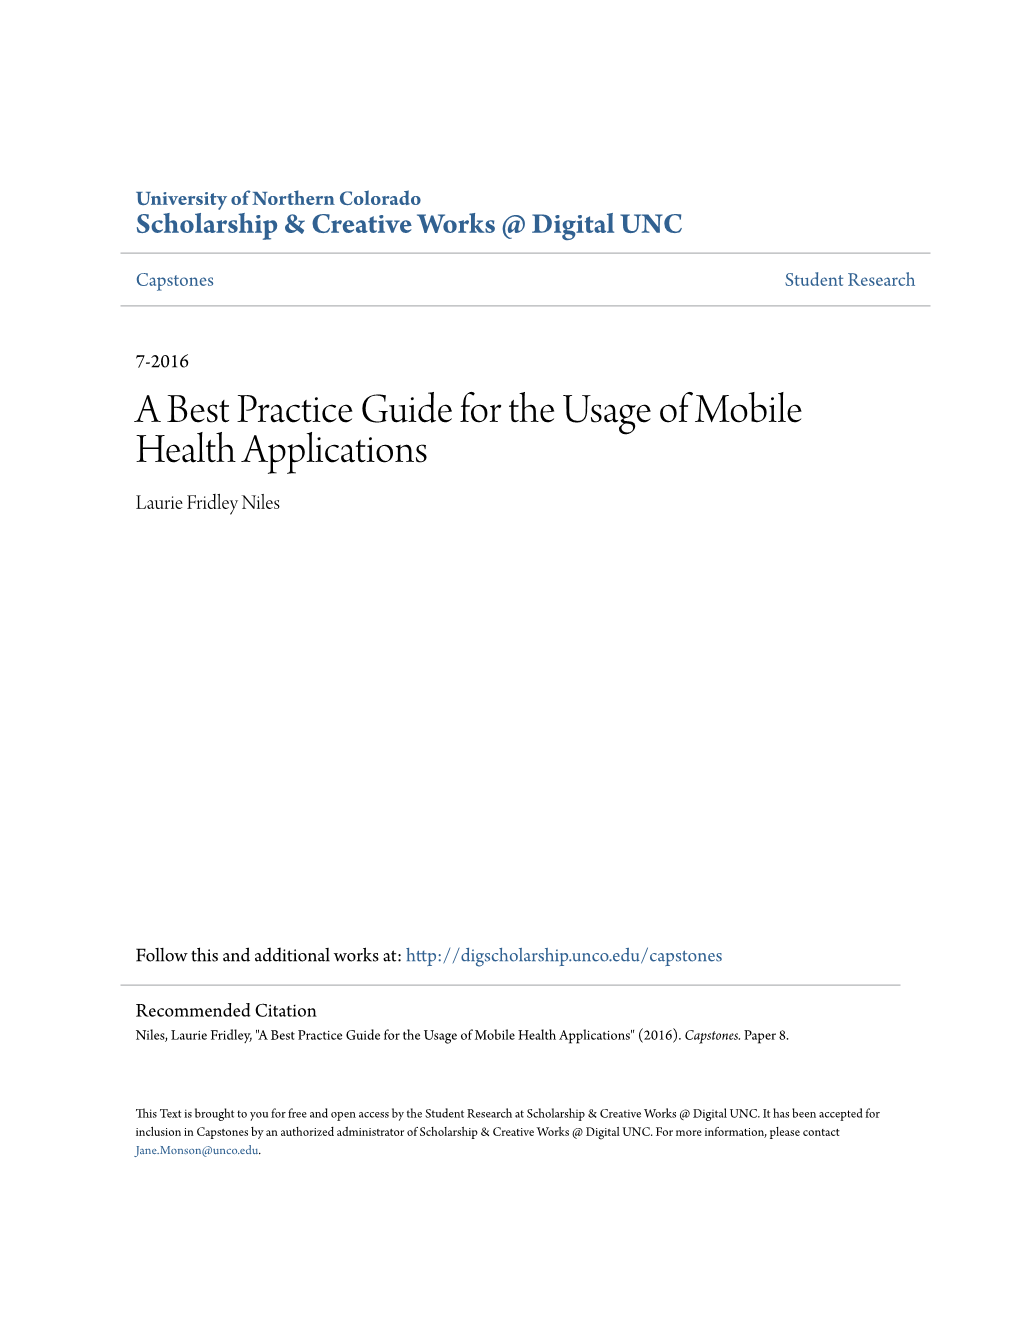 A Best Practice Guide for the Usage of Mobile Health Applications Laurie Fridley Niles